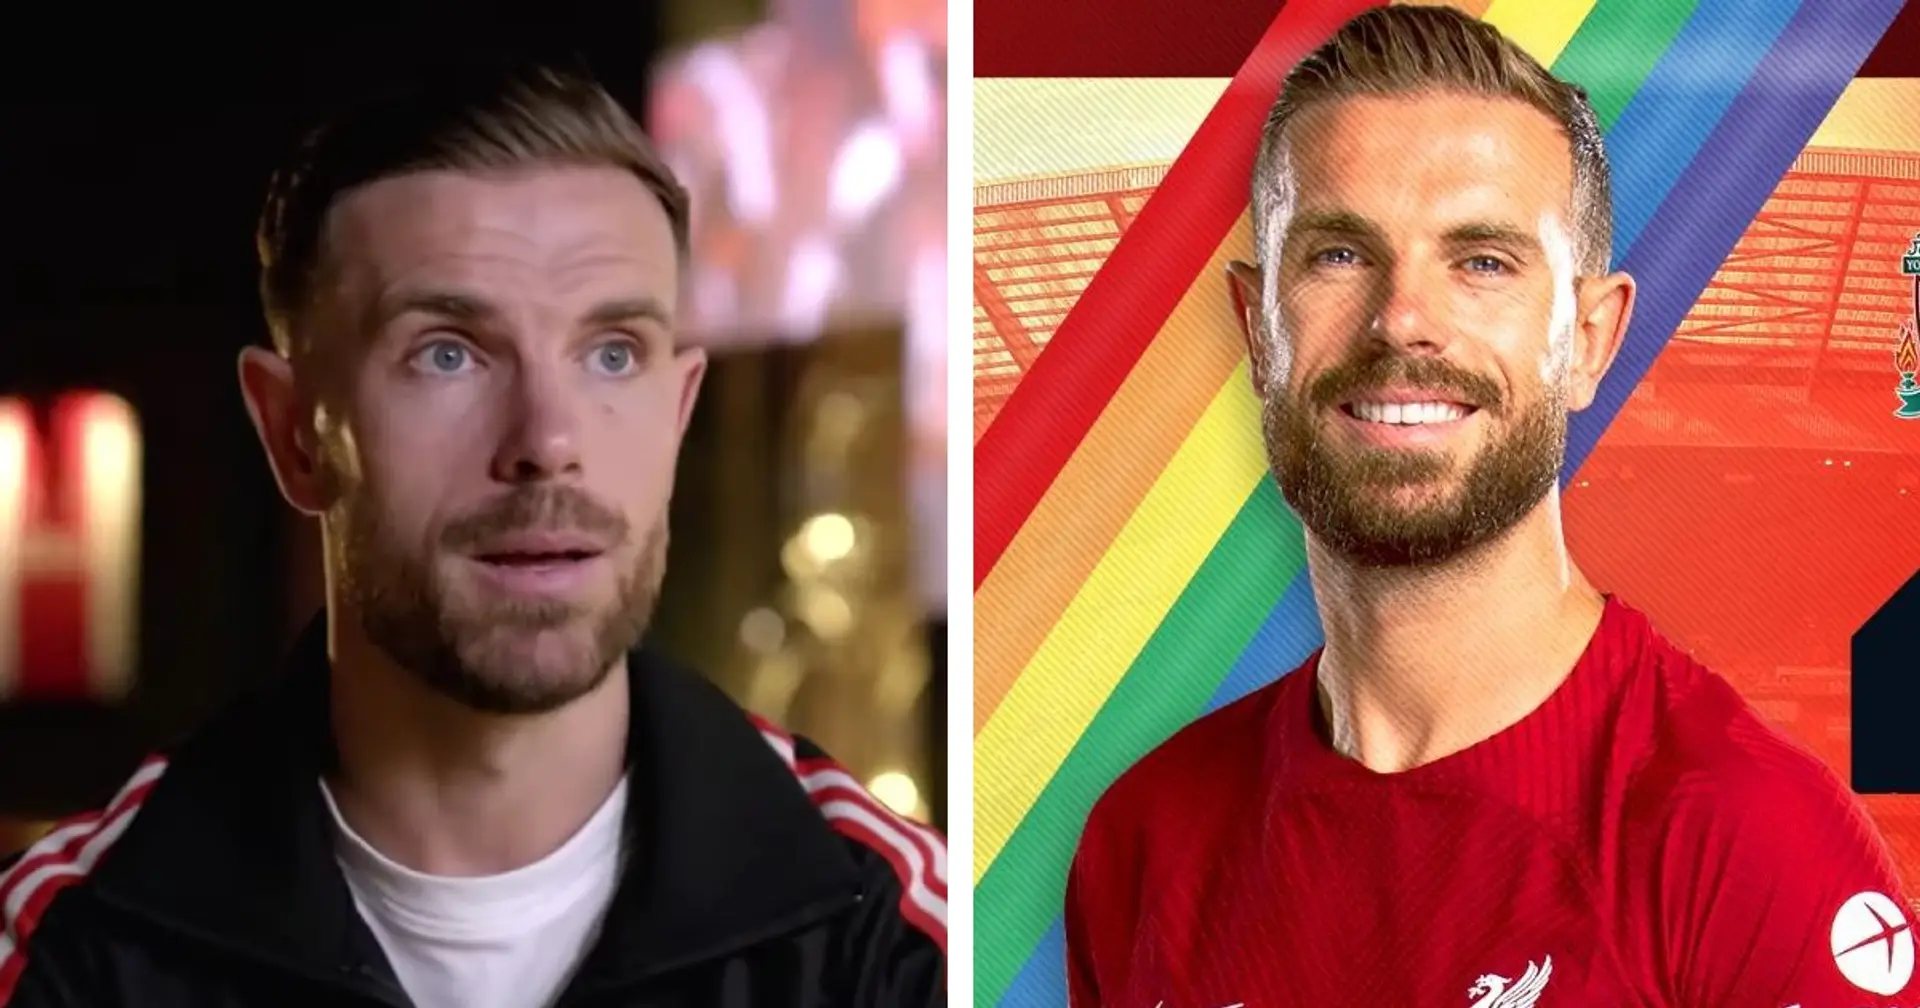 'I can apologise': Jordan Henderson on if he has to make up with LGBT community